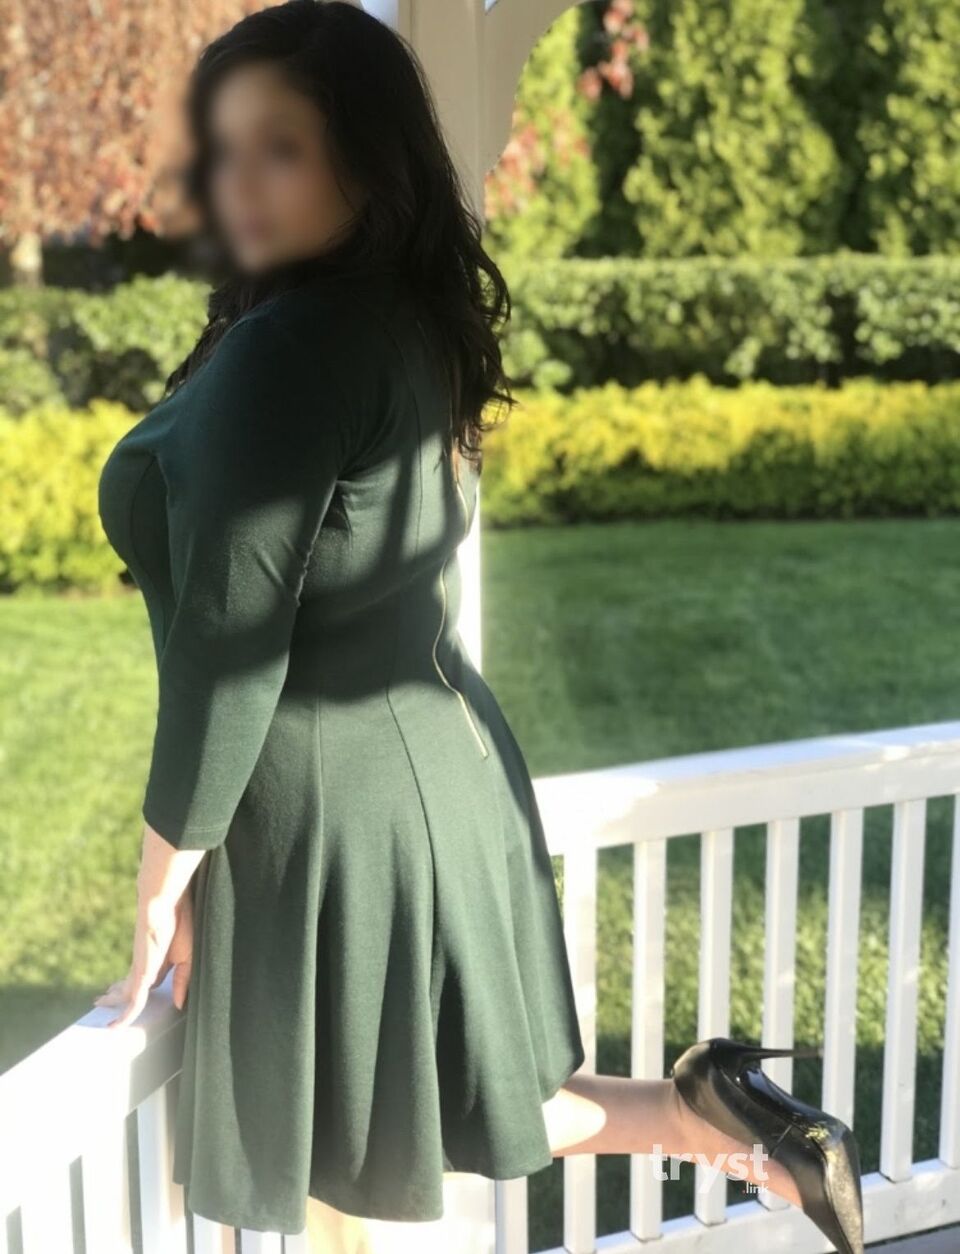 😍I am Angela Rose, the busty and sensual vixen of your dreams.My body is voluptuous and luscious, my skin is soft to the touchI offer erotic massages as well as a multitude of other services, such as BDSM/Kink/Fetish, virtual shows, custom content and more.I am sure I can give you a wonderful and explosive experience that will leave you wanting more.